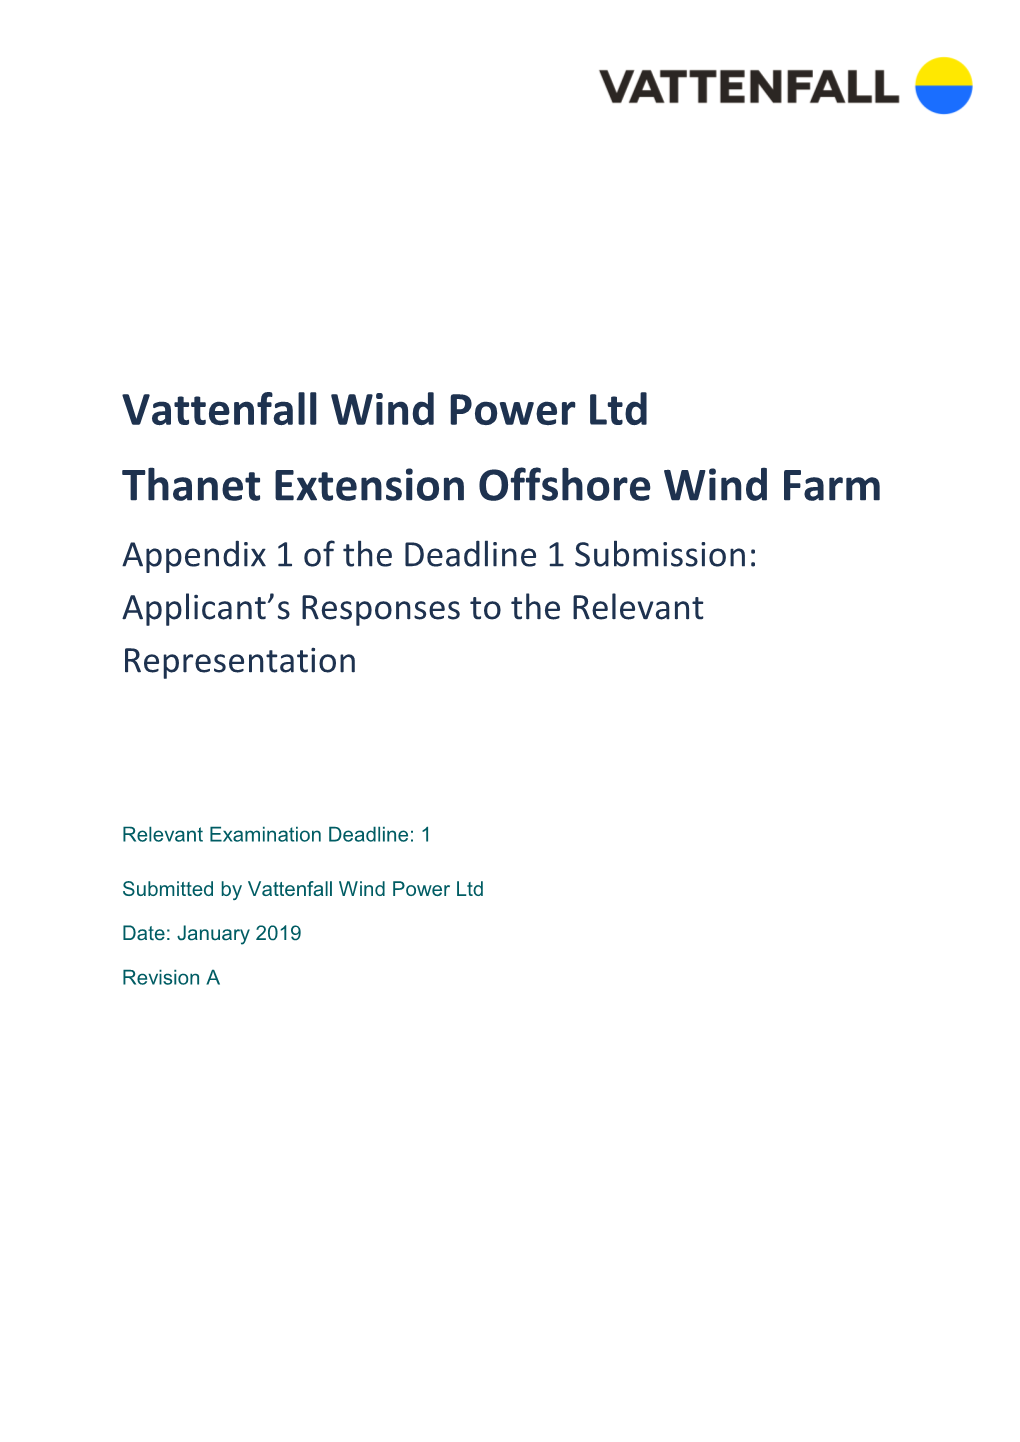 Vattenfall Wind Power Ltd Thanet Extension Offshore Wind Farm Appendix 1 of the Deadline 1 Submission: Applicant’S Responses to the Relevant Representation